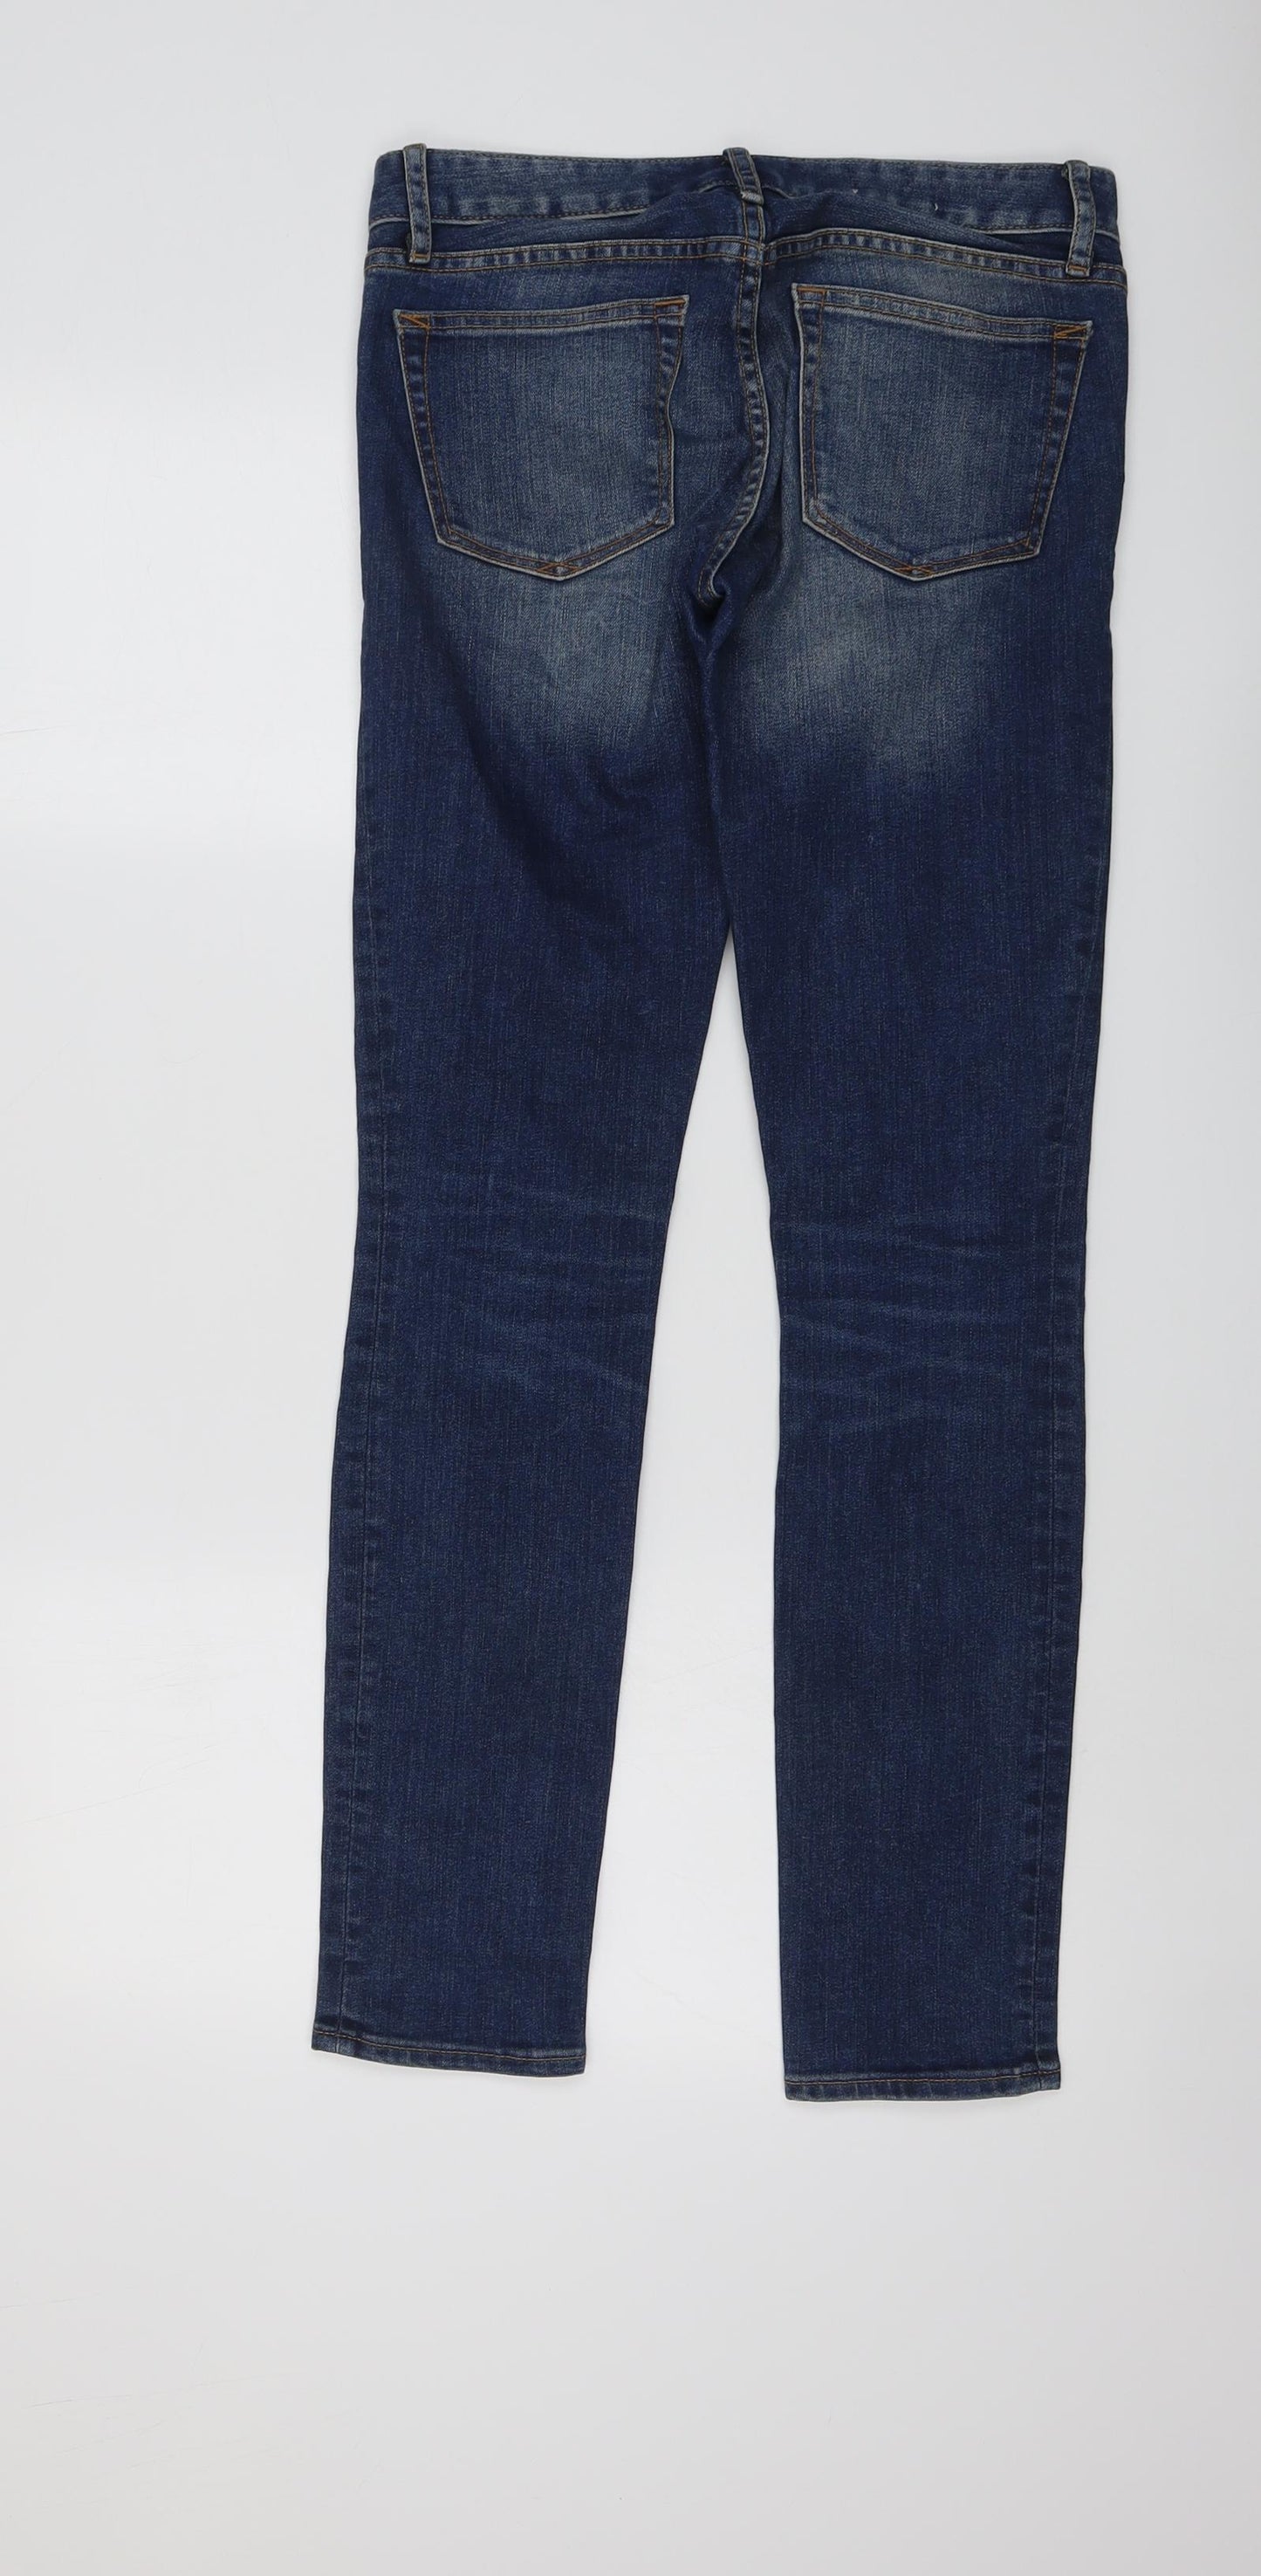 Gap Womens Blue Cotton Skinny Jeans Size 25 in L30 in Regular Button